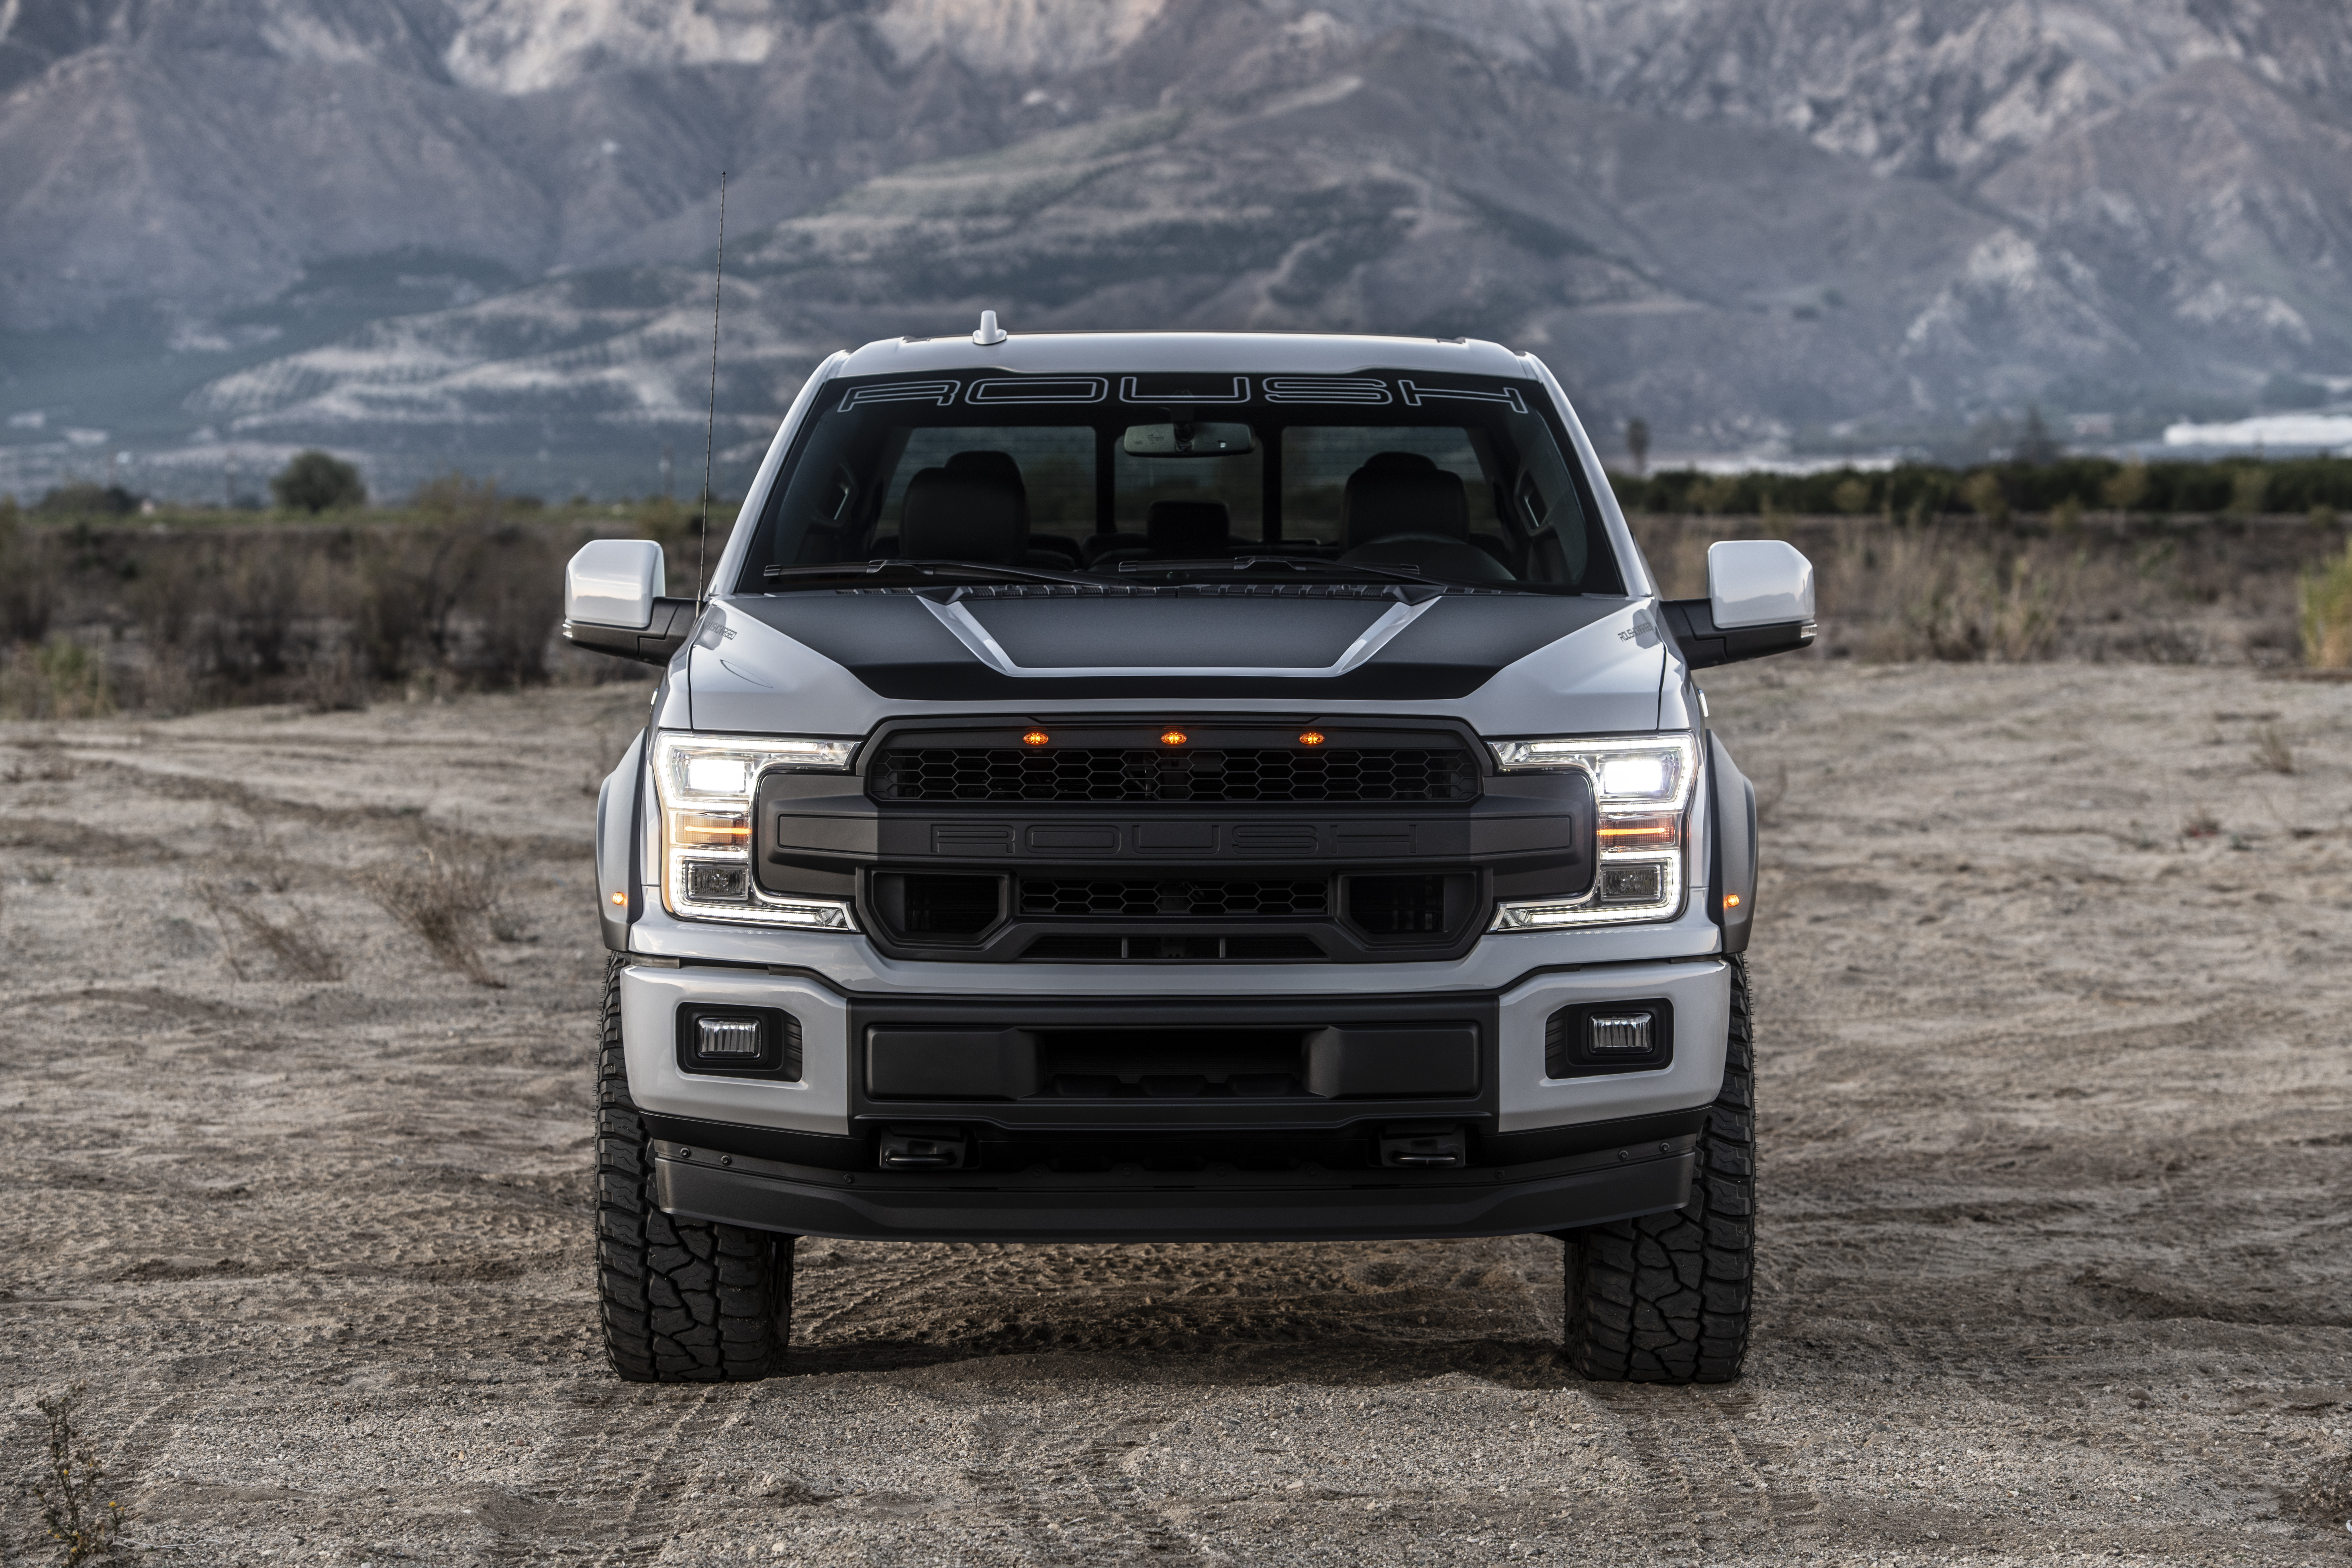 Roush F-150 SC, 2018 Roush F-150 SC is the truck promised in all those commercials, ClassicCars.com Journal